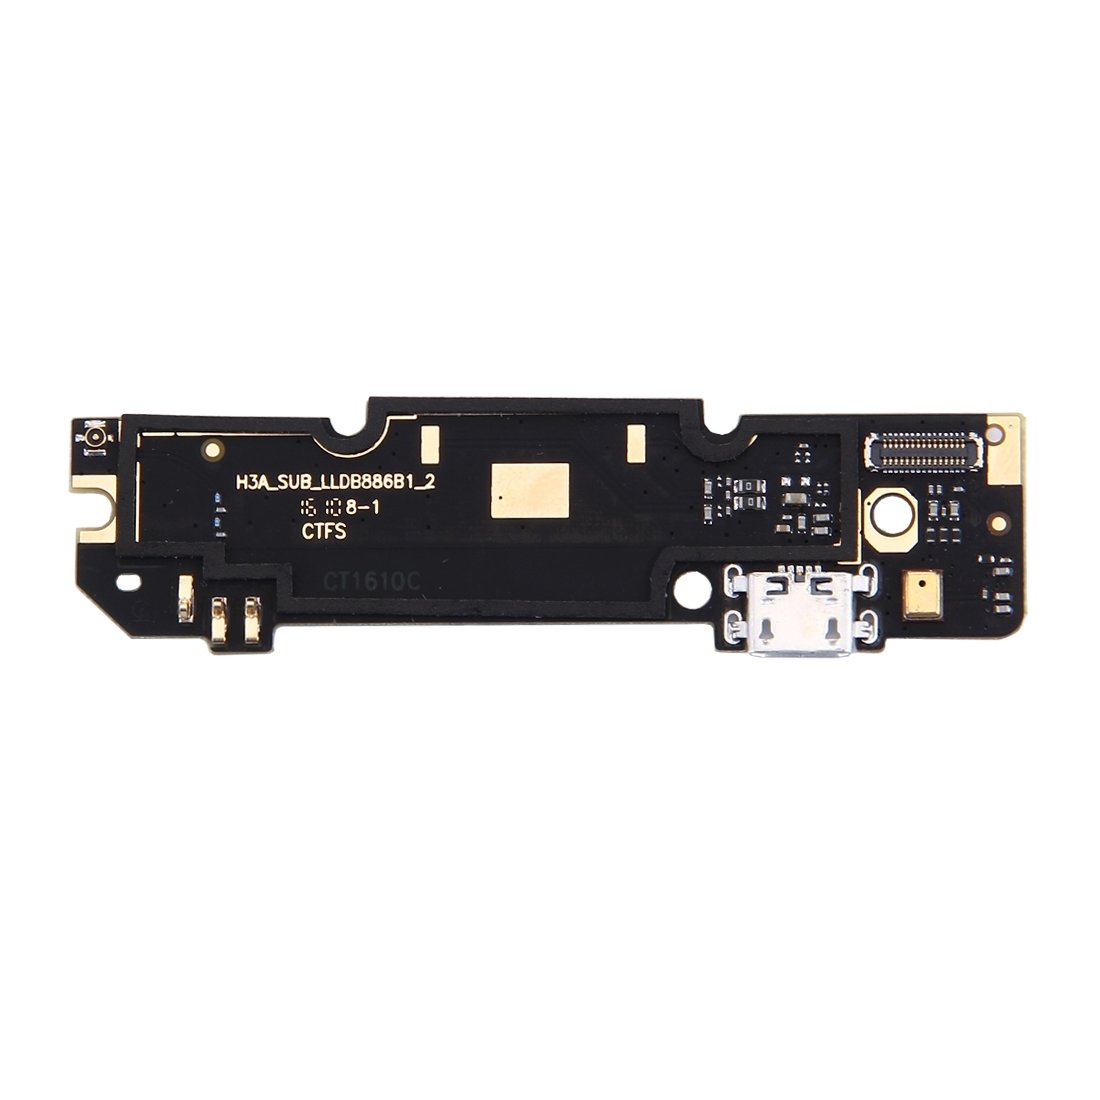 Xiaomi Redmi Note 3 Pro USB Charging Port Board With Microphone for [product_price] - First Help Tech